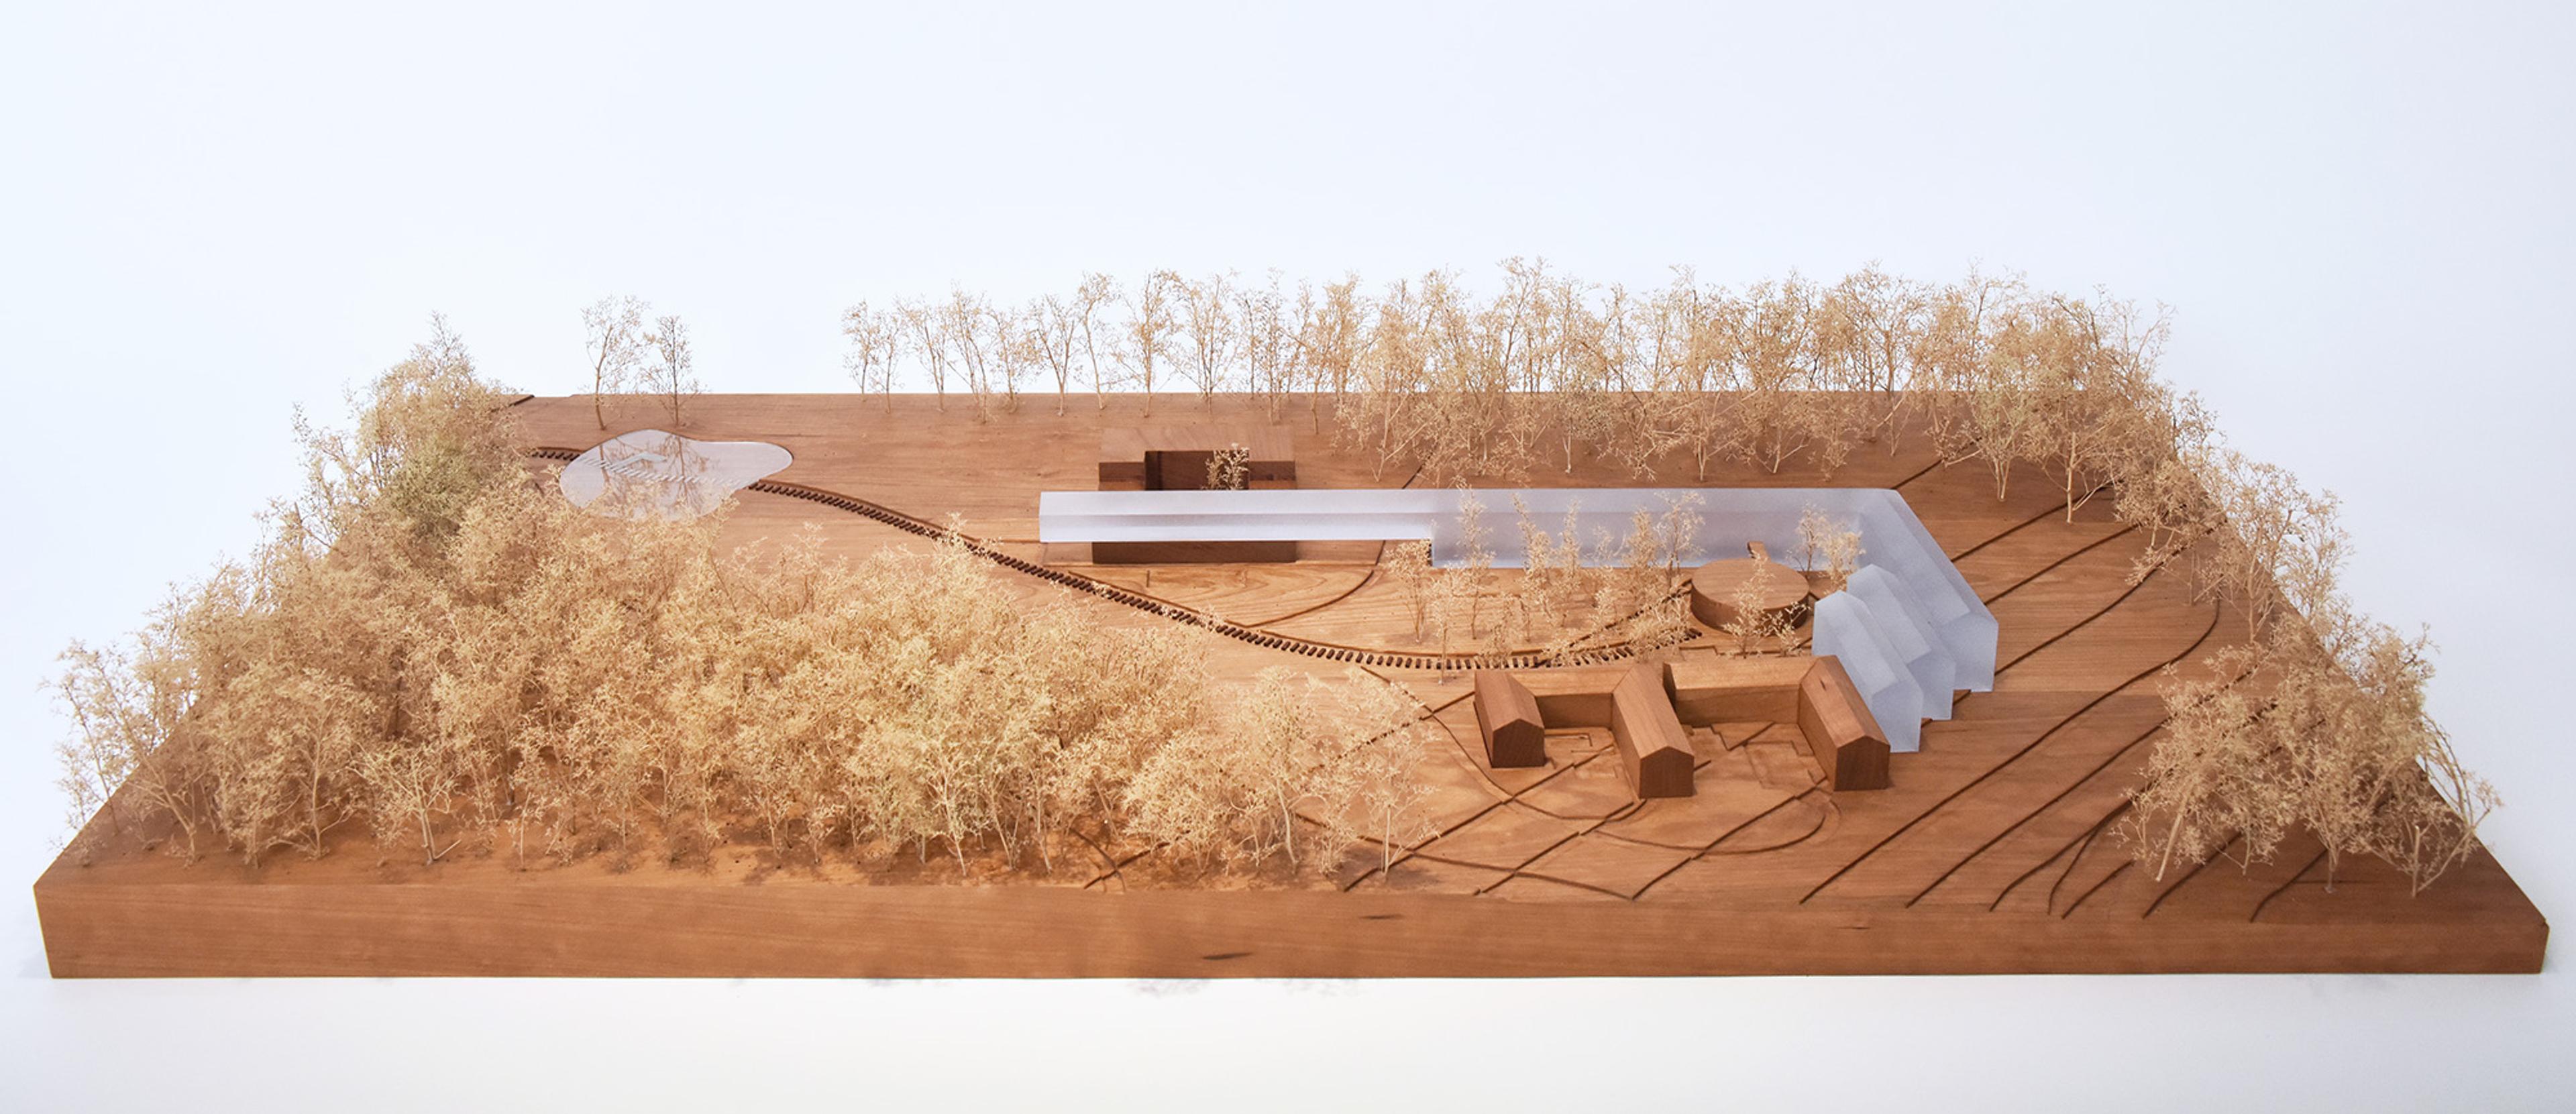 architectural model of modern structure on a hill within a forest